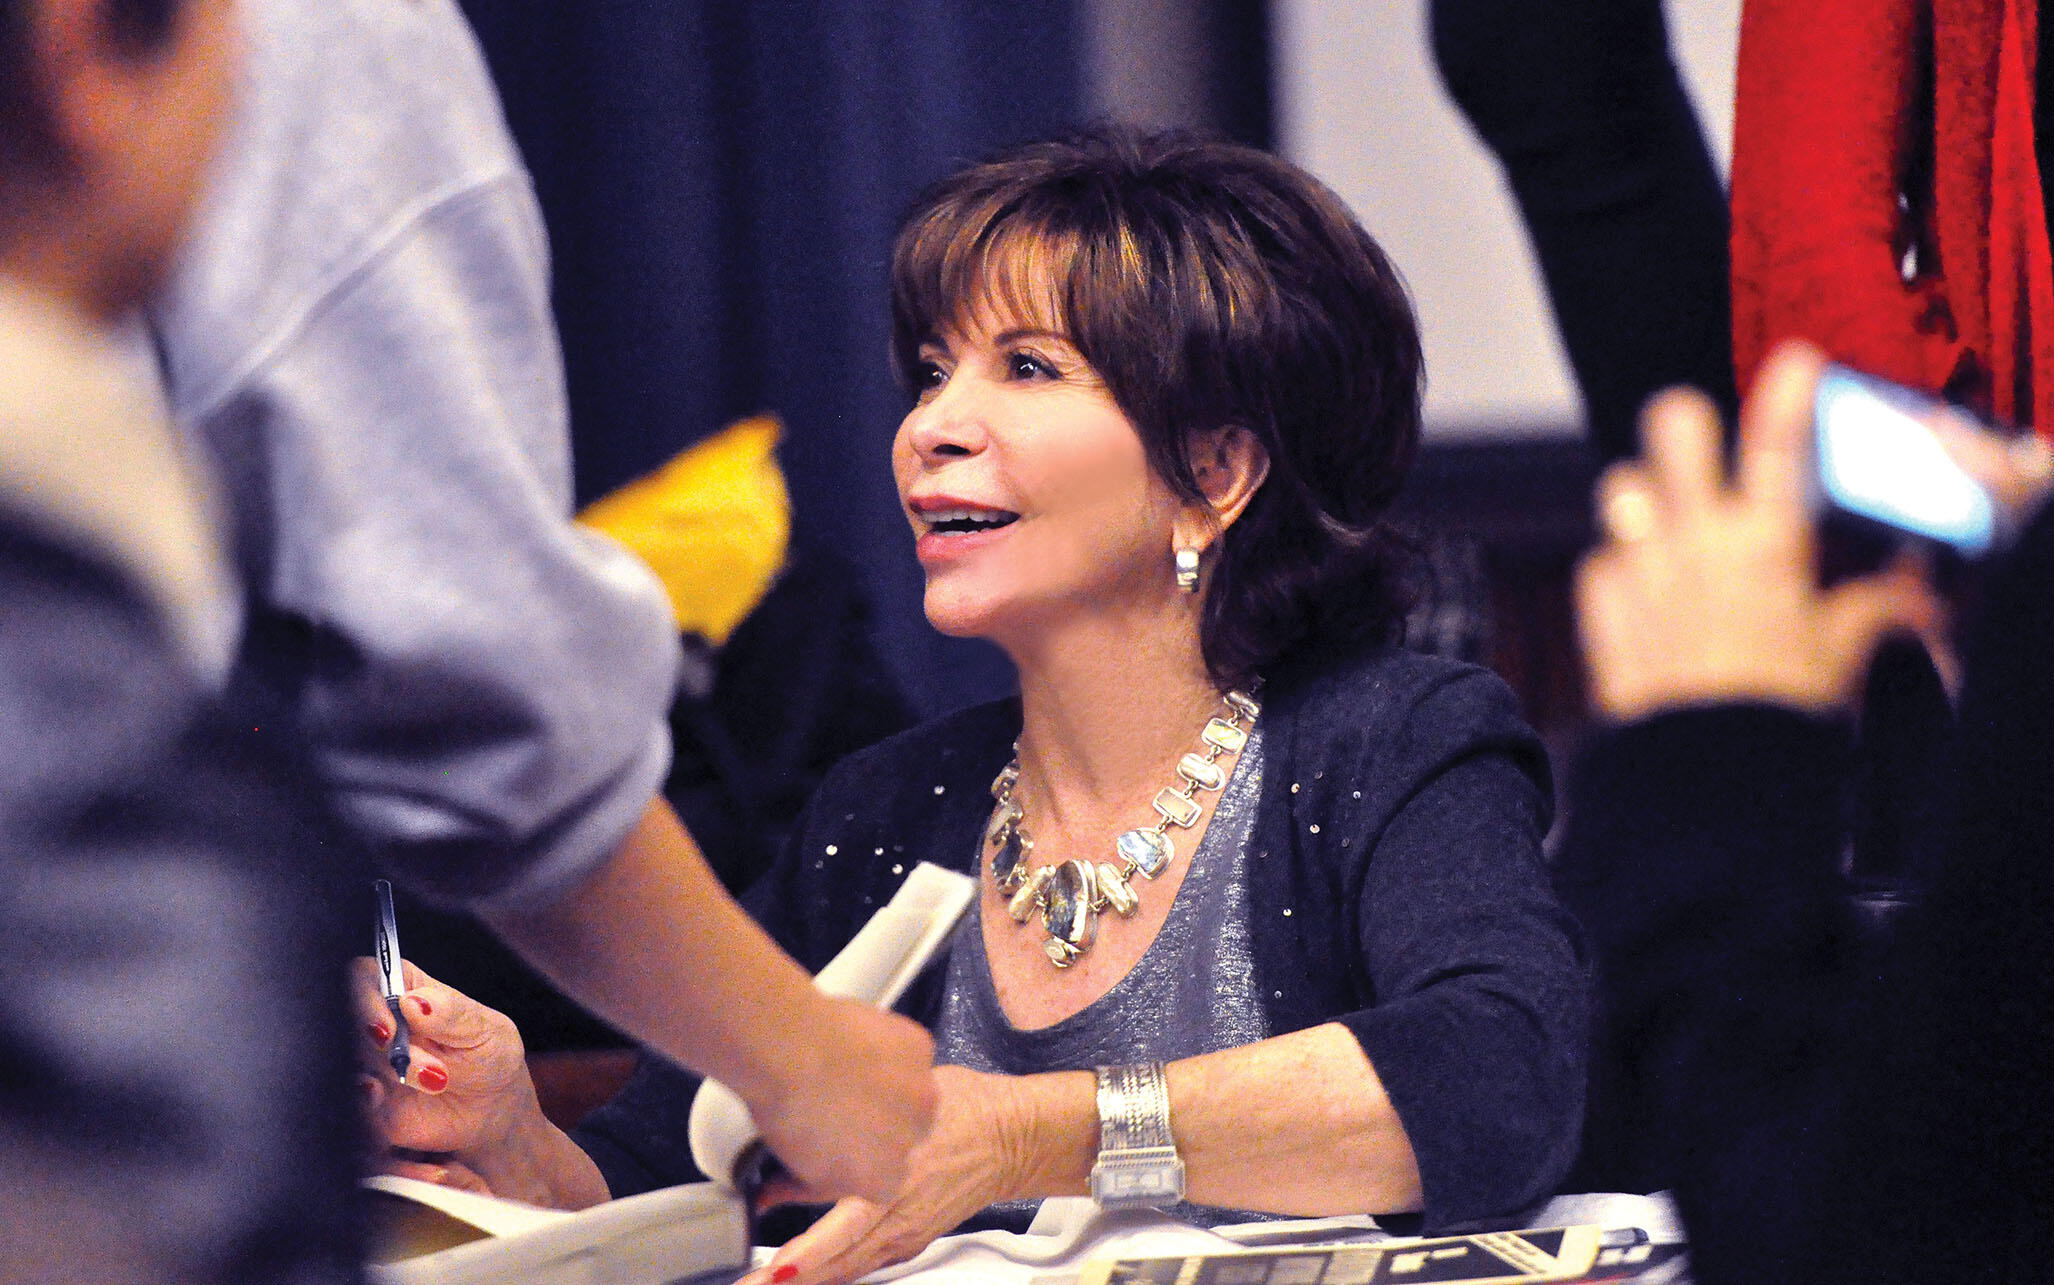 Isabel Allende looks up at an audience member as she signs copies of "Maya's Notebook" at UC Berkeley. (Photo by Peg Skorpinski.)